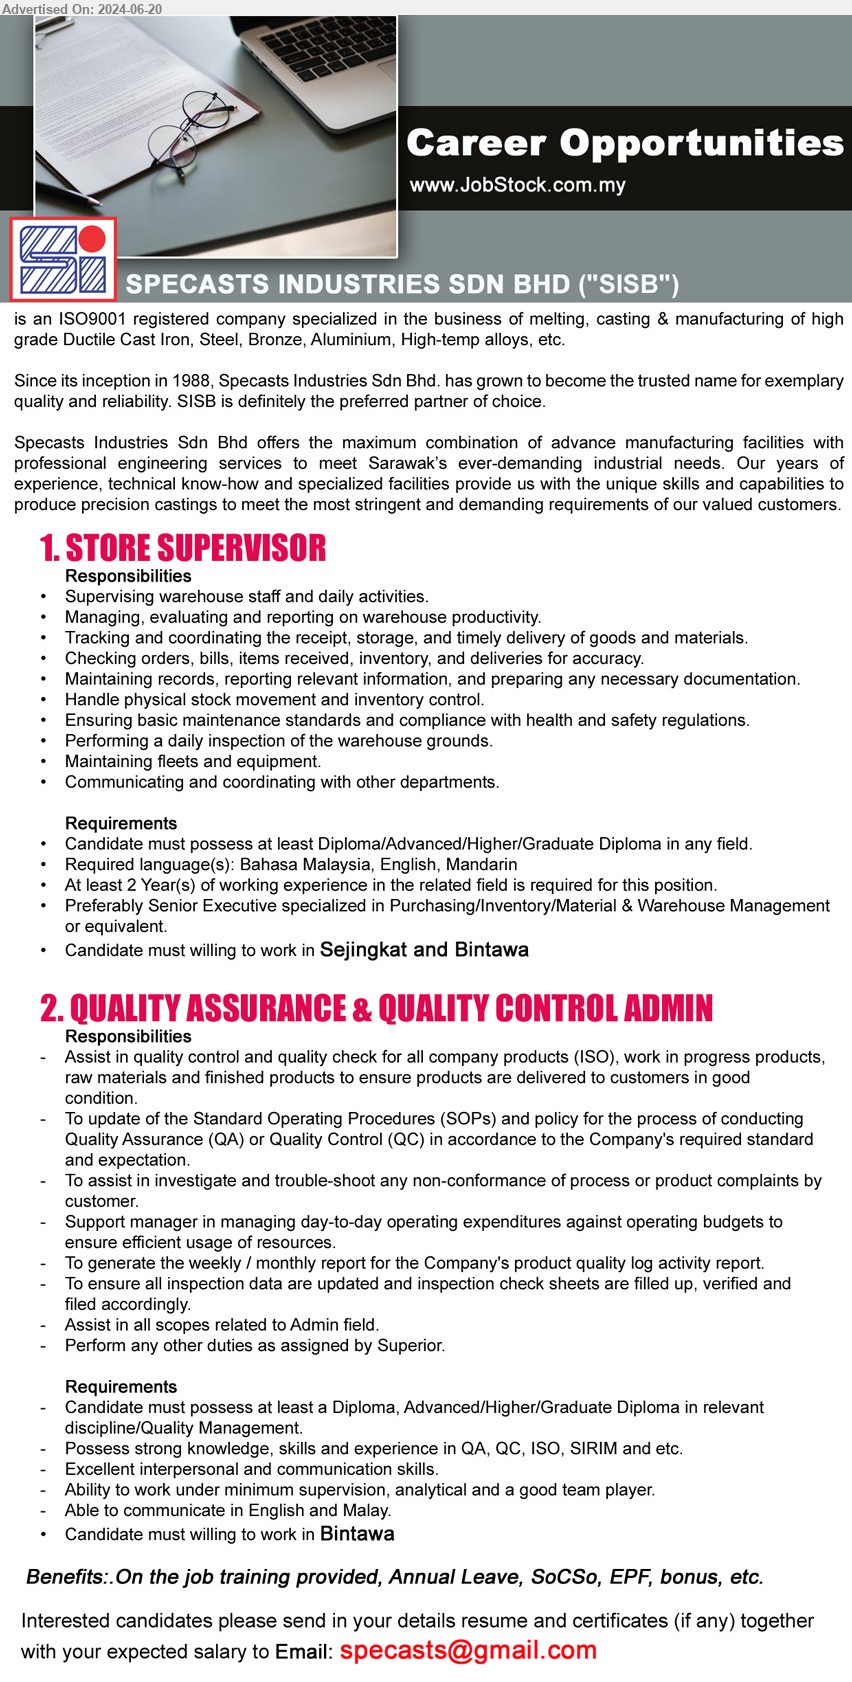 SPECASTS INDUSTRIES SDN BHD - 1. STORE SUPERVISOR  (Kuching), Diploma/Advanced/Higher/Graduate Diploma, Preferably Senior Executive specialized in Purchasing/Inventory/Material & Warehouse Management,...
2. QUALITY ASSURANCE & QUALITY CONTROL ADMIN  (Kuching), Diploma, Advanced/Higher/Graduate Diploma in relevant discipline /Quality Management, Possess strong knowledge, skills and experience in QA, QC, ISO, SIRIM and etc....
Email resume to ...